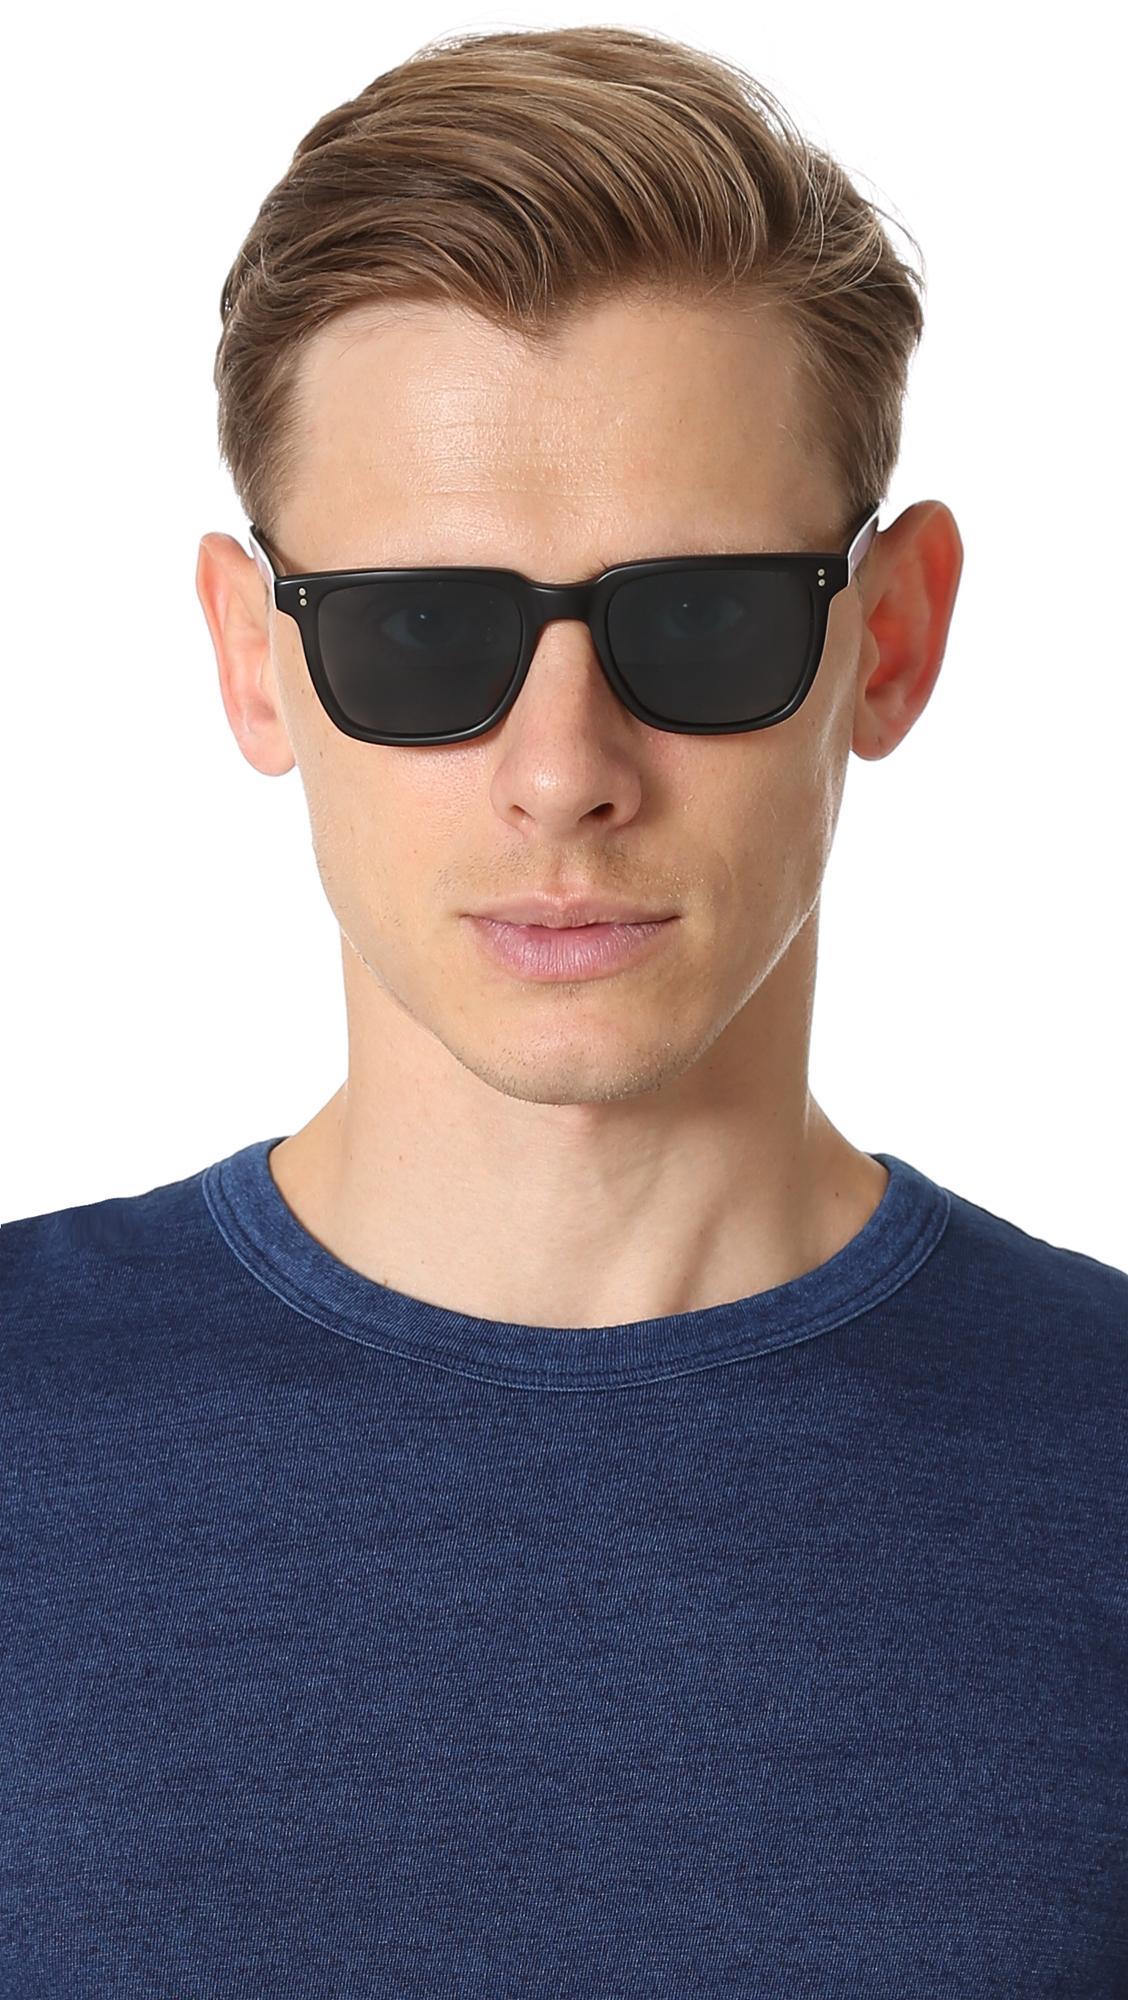 Oliver Peoples Ndg Sunglasses in Blue for Men - Lyst